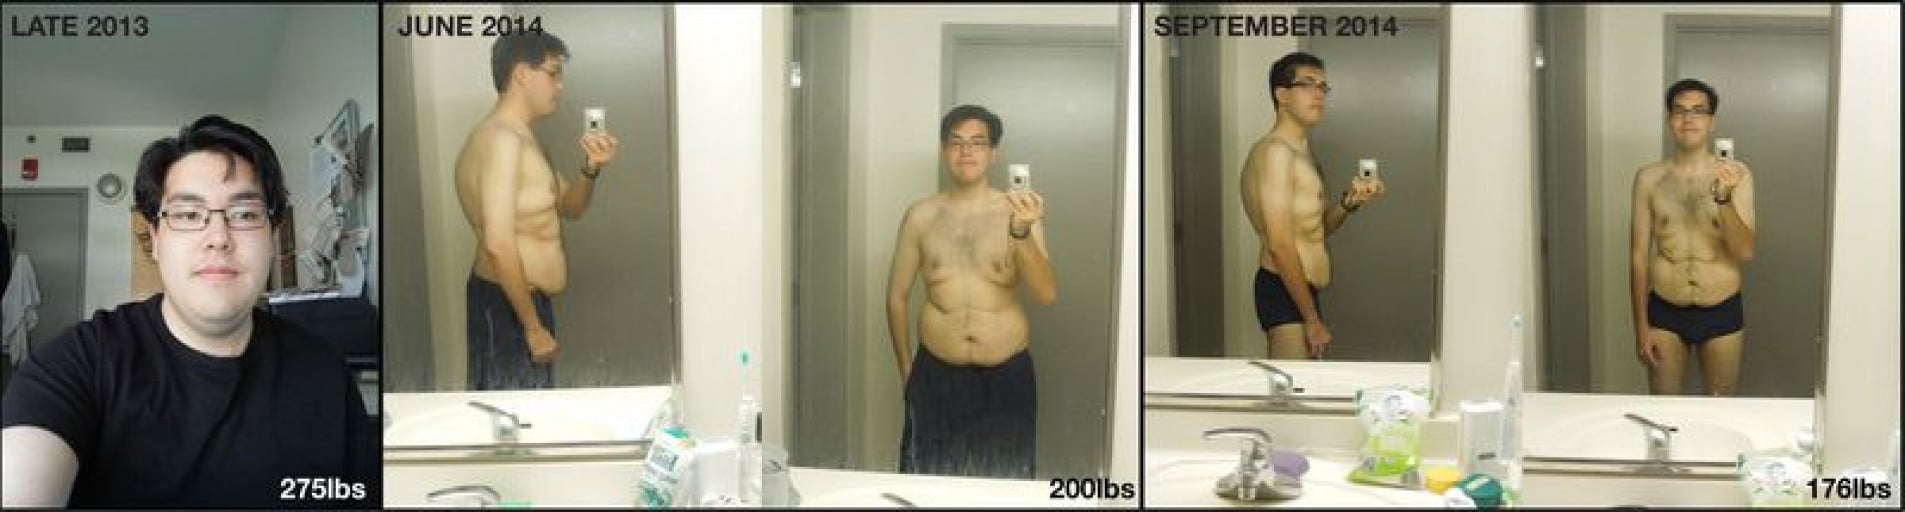 A before and after photo of a 5'11" male showing a weight reduction from 275 pounds to 176 pounds. A net loss of 99 pounds.